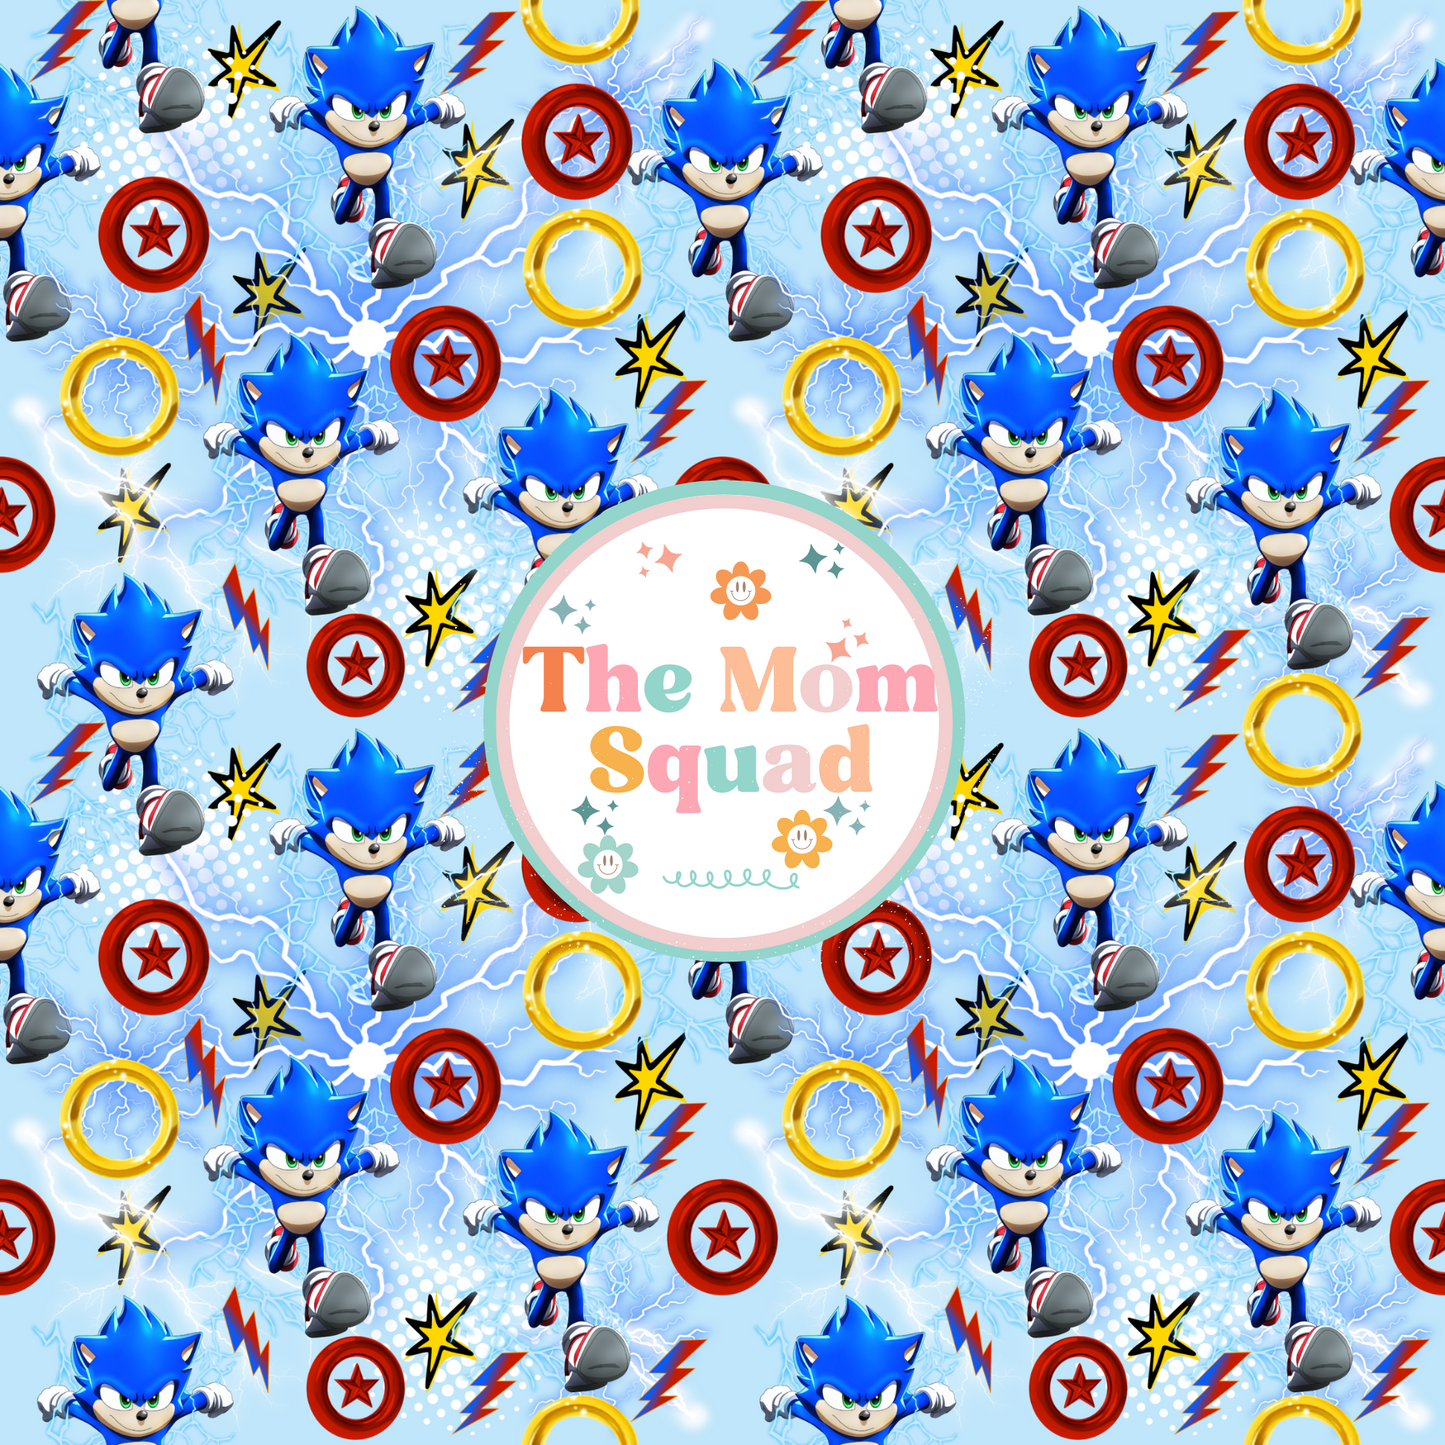 Sonic the Hedgehog Seamless Pattern - Speed into Style with the Blue Blur!